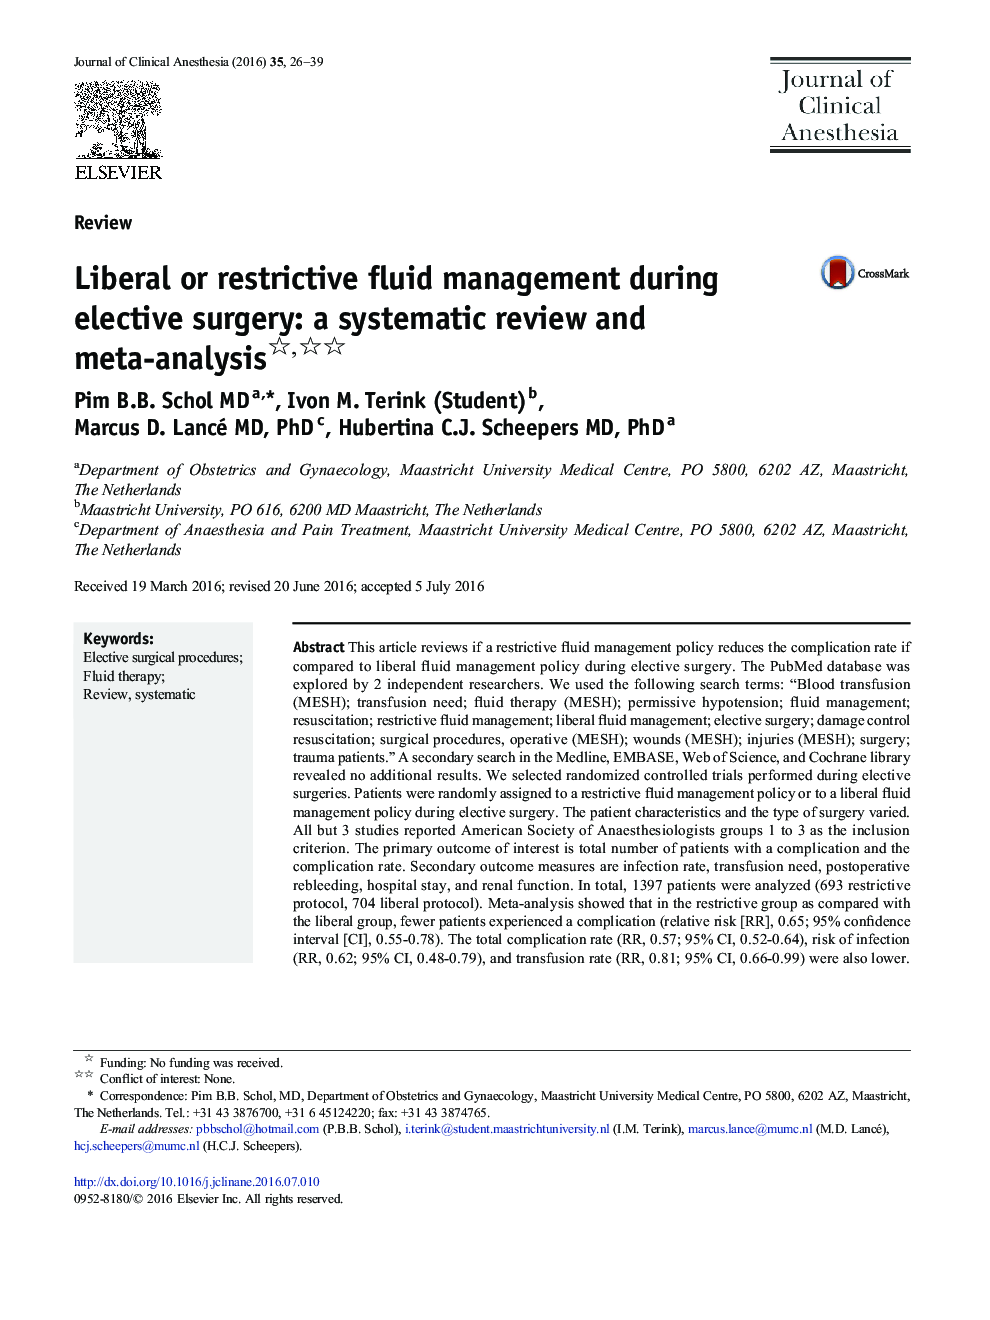 Liberal or restrictive fluid management during elective surgery: a systematic review and meta-analysis